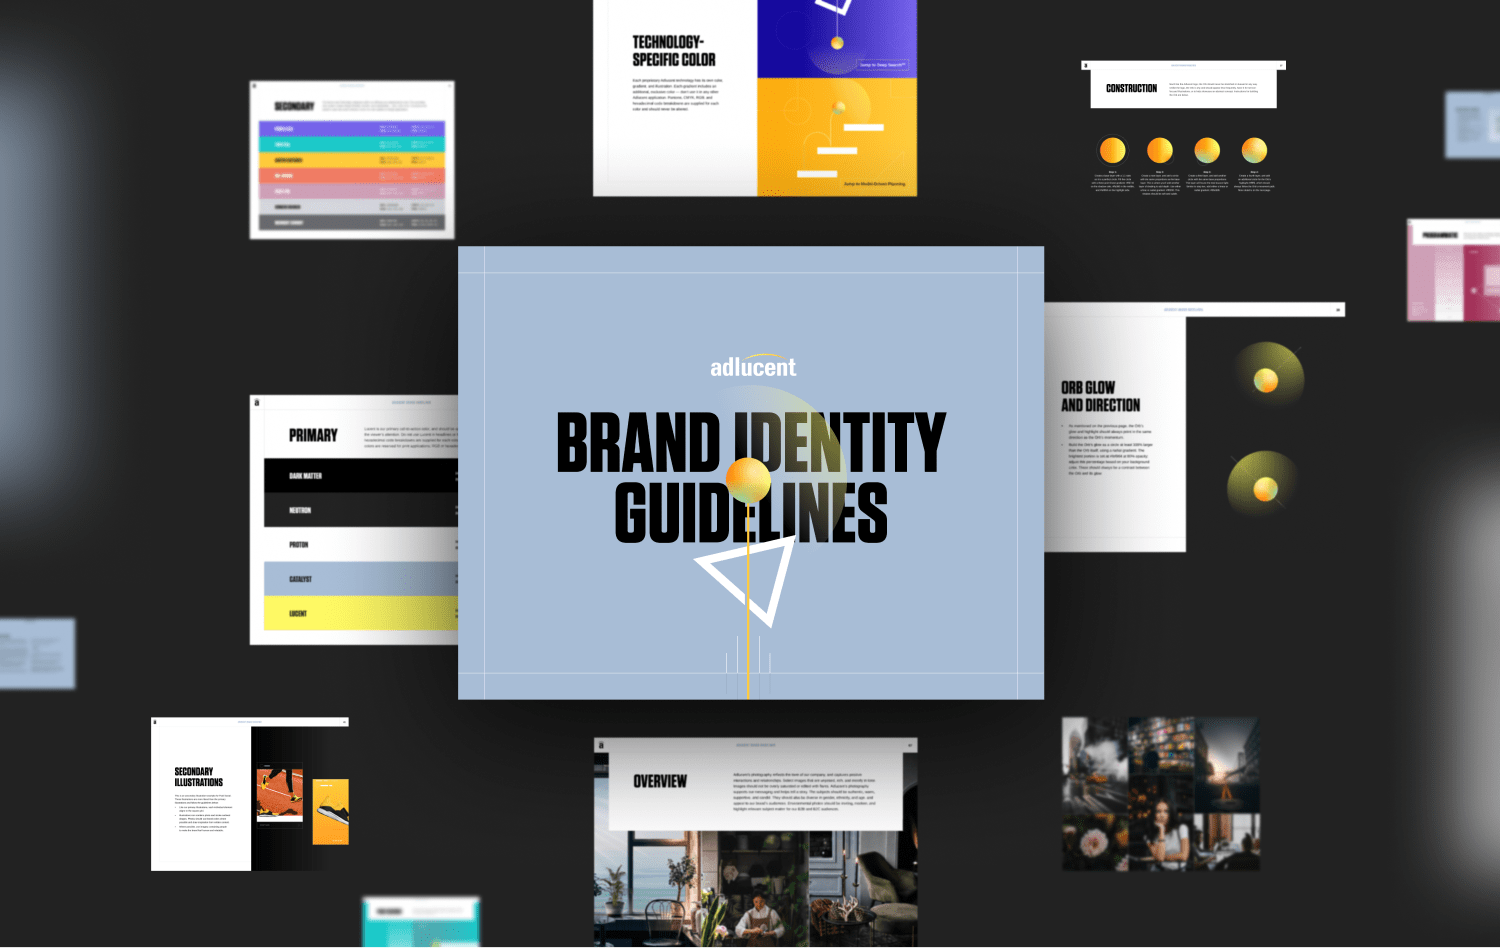 Mockup of Adlucent's new brand guidelines.